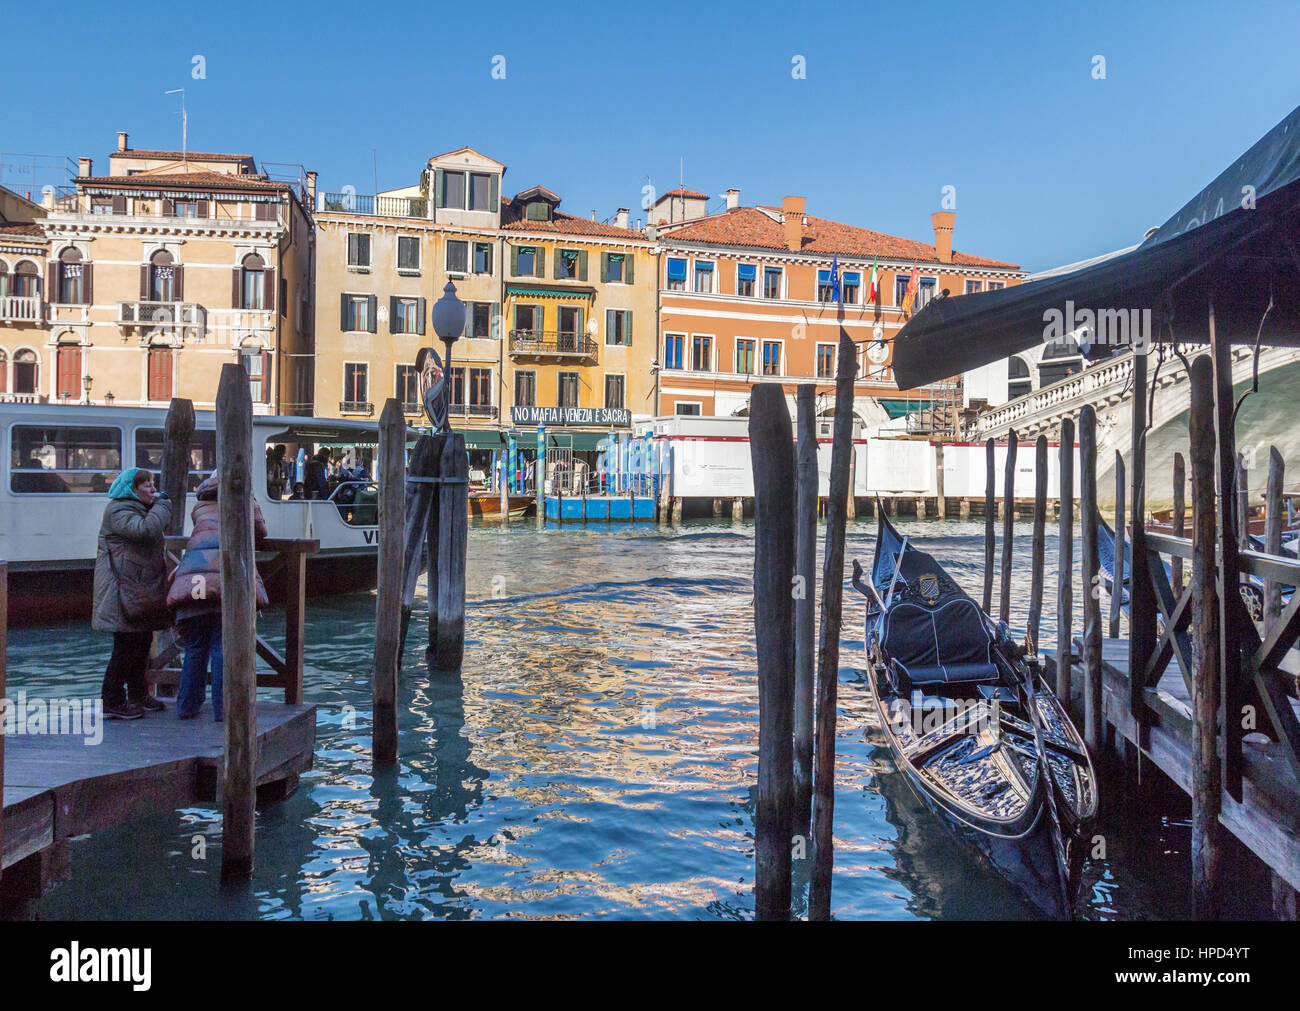 A view of tourists and the Grand Canal in Venice, Italy. Stock Photo